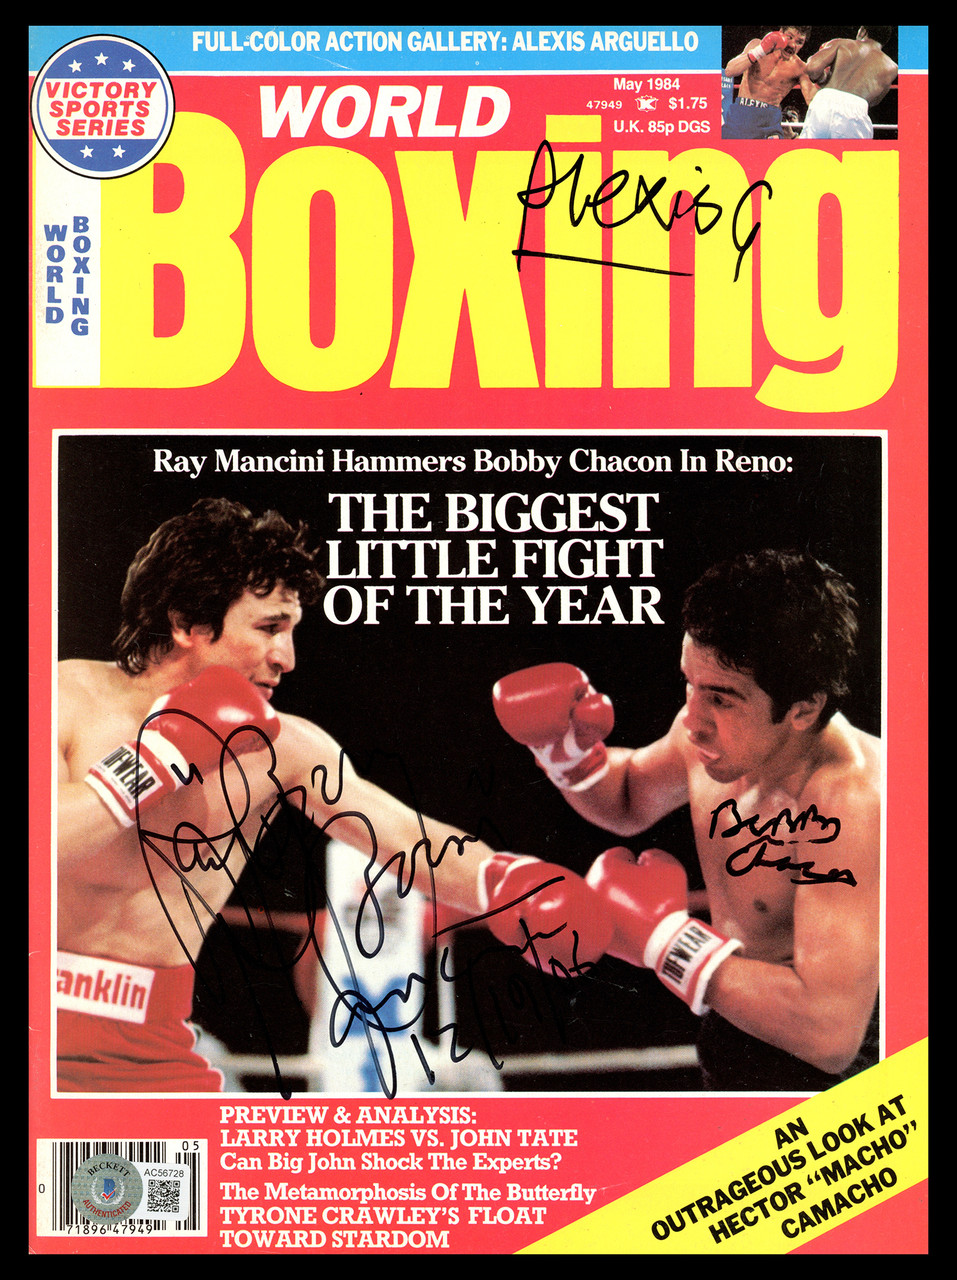 Ray Mancini fights on boxing DVDs